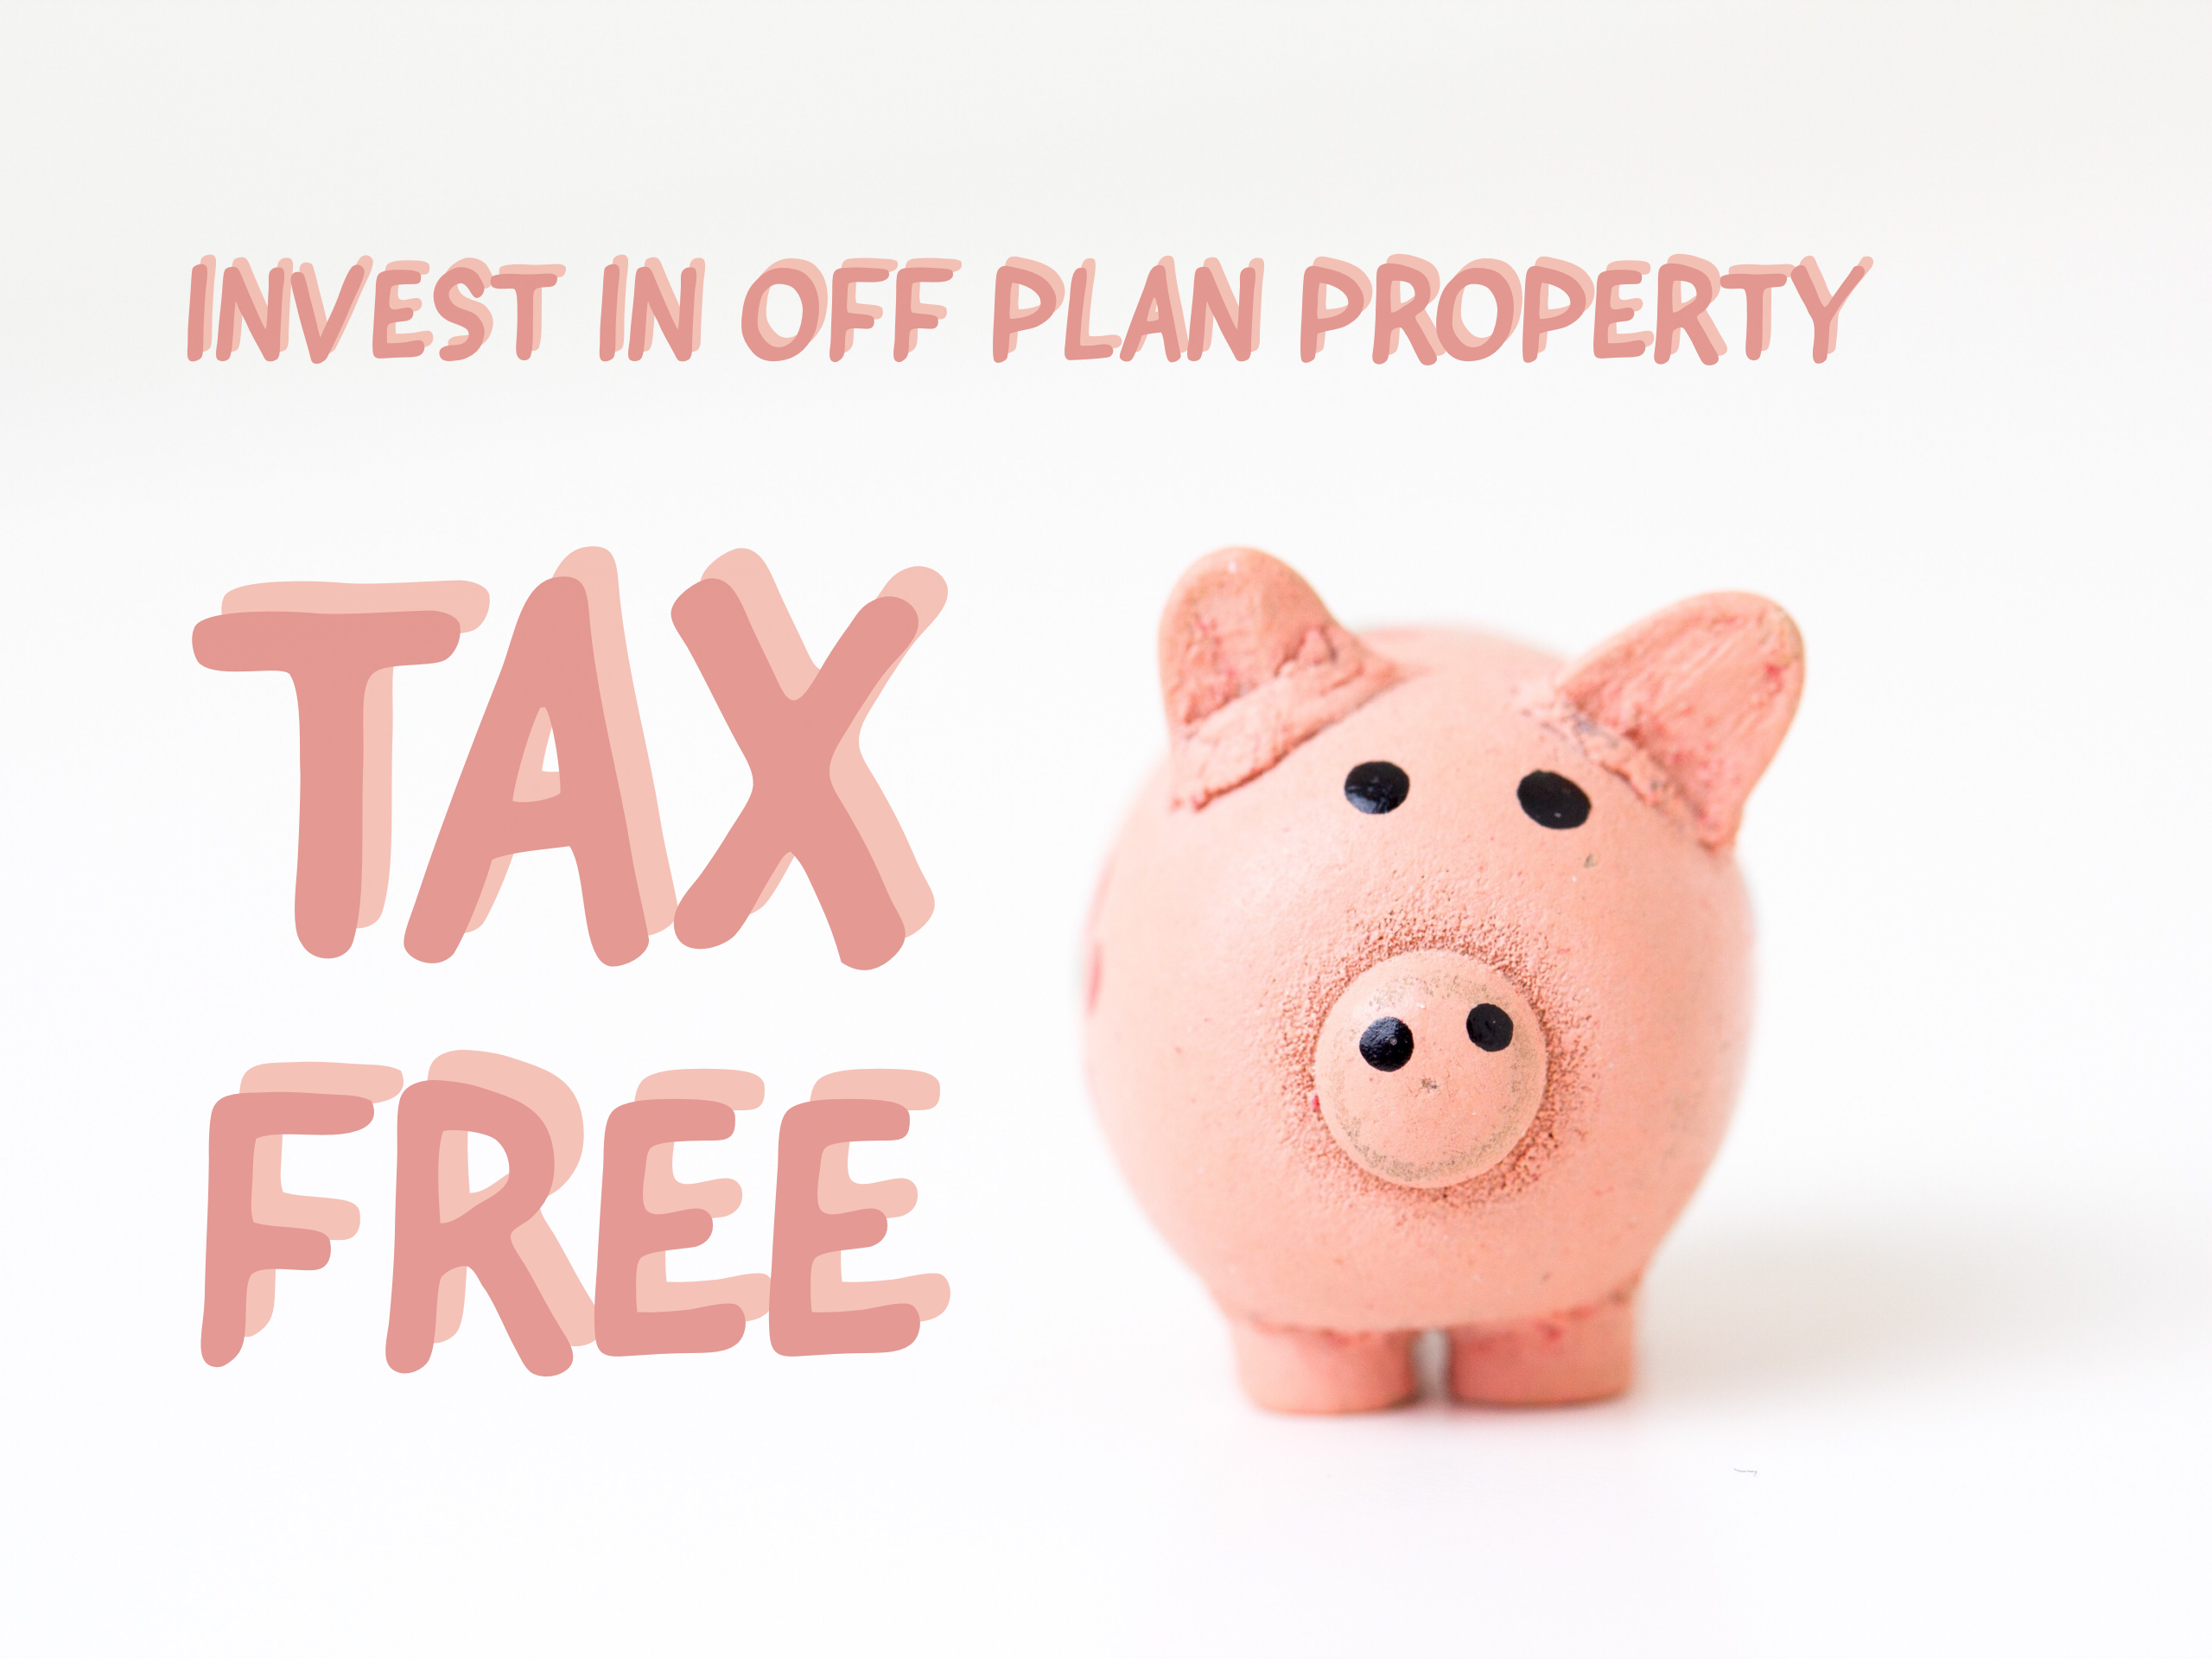 Rent tax free for 2 years - developments named Image